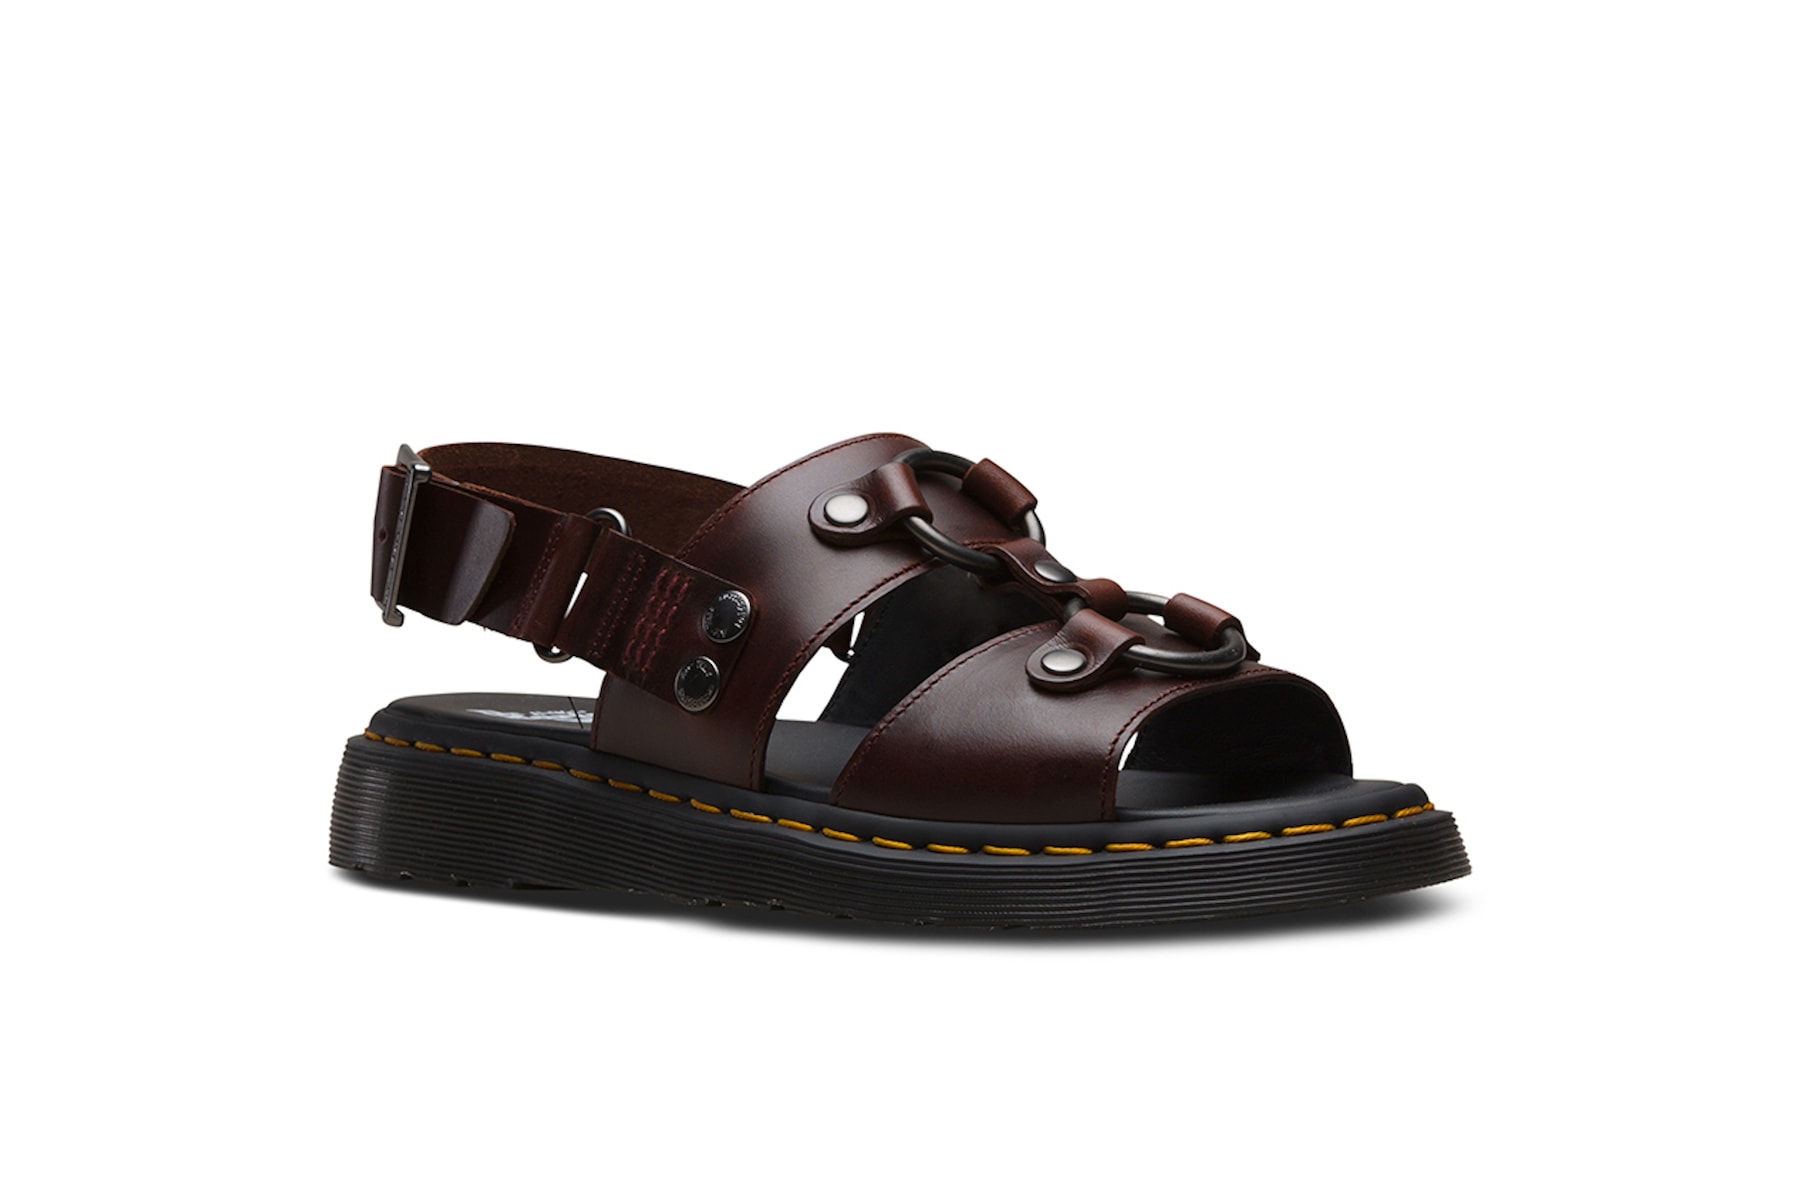 Dr. Martens Sandal Collection Festival Season Shoe Footwear Colorful Leather Silhouettes Straps Summer Concert Outfit Pink Yellow Purple Design Release